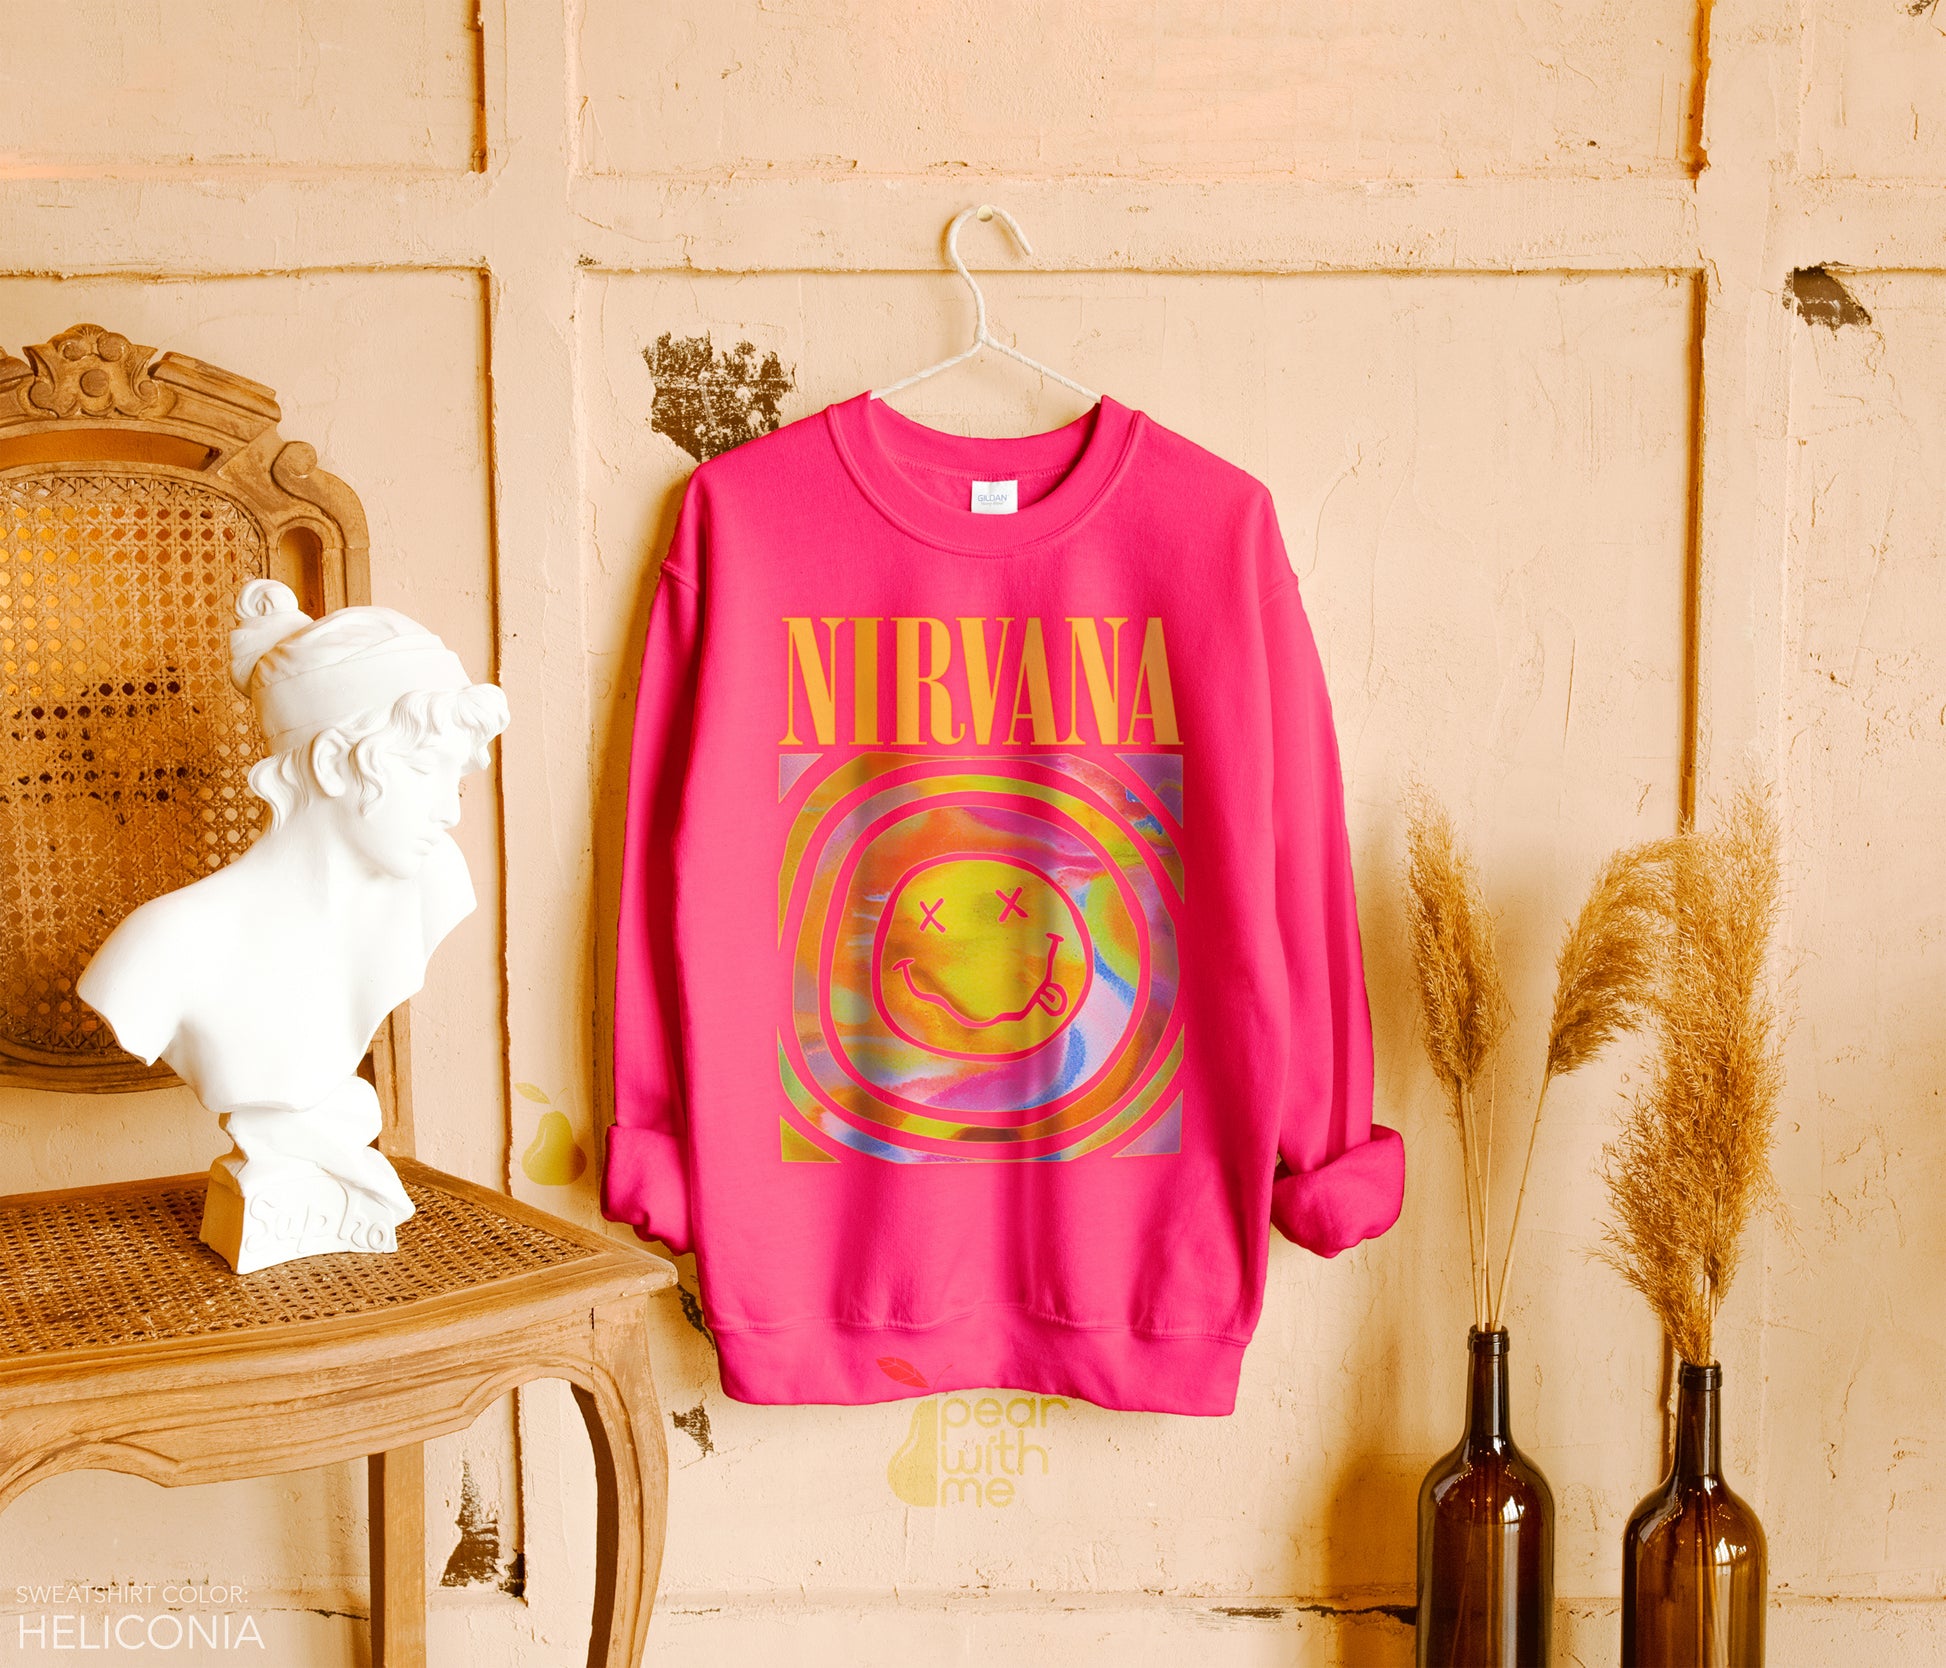 Nirvana Smiley Face Crewneck Sweatshirt Pullover - pear with me